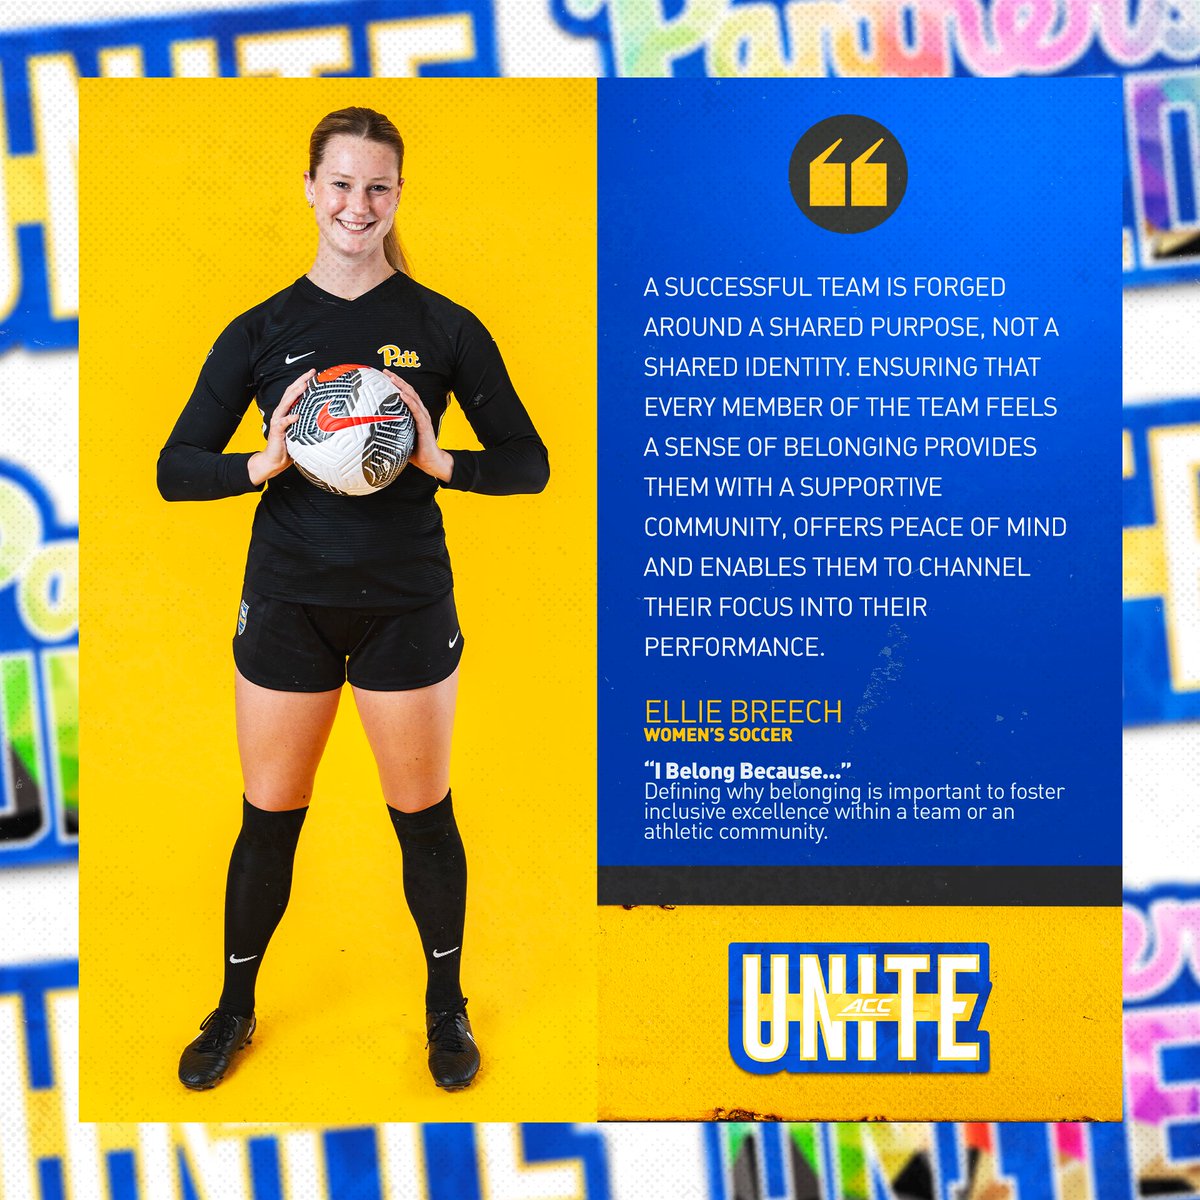 It's day two of the NCAA Diversity & Inclusion Campaign. Why is belonging important to foster inclusive excellence within a team or an athletic community? ⬇️⬇️⬇️ @BreechEllie #UNITYWeek x #NCAAInclusion